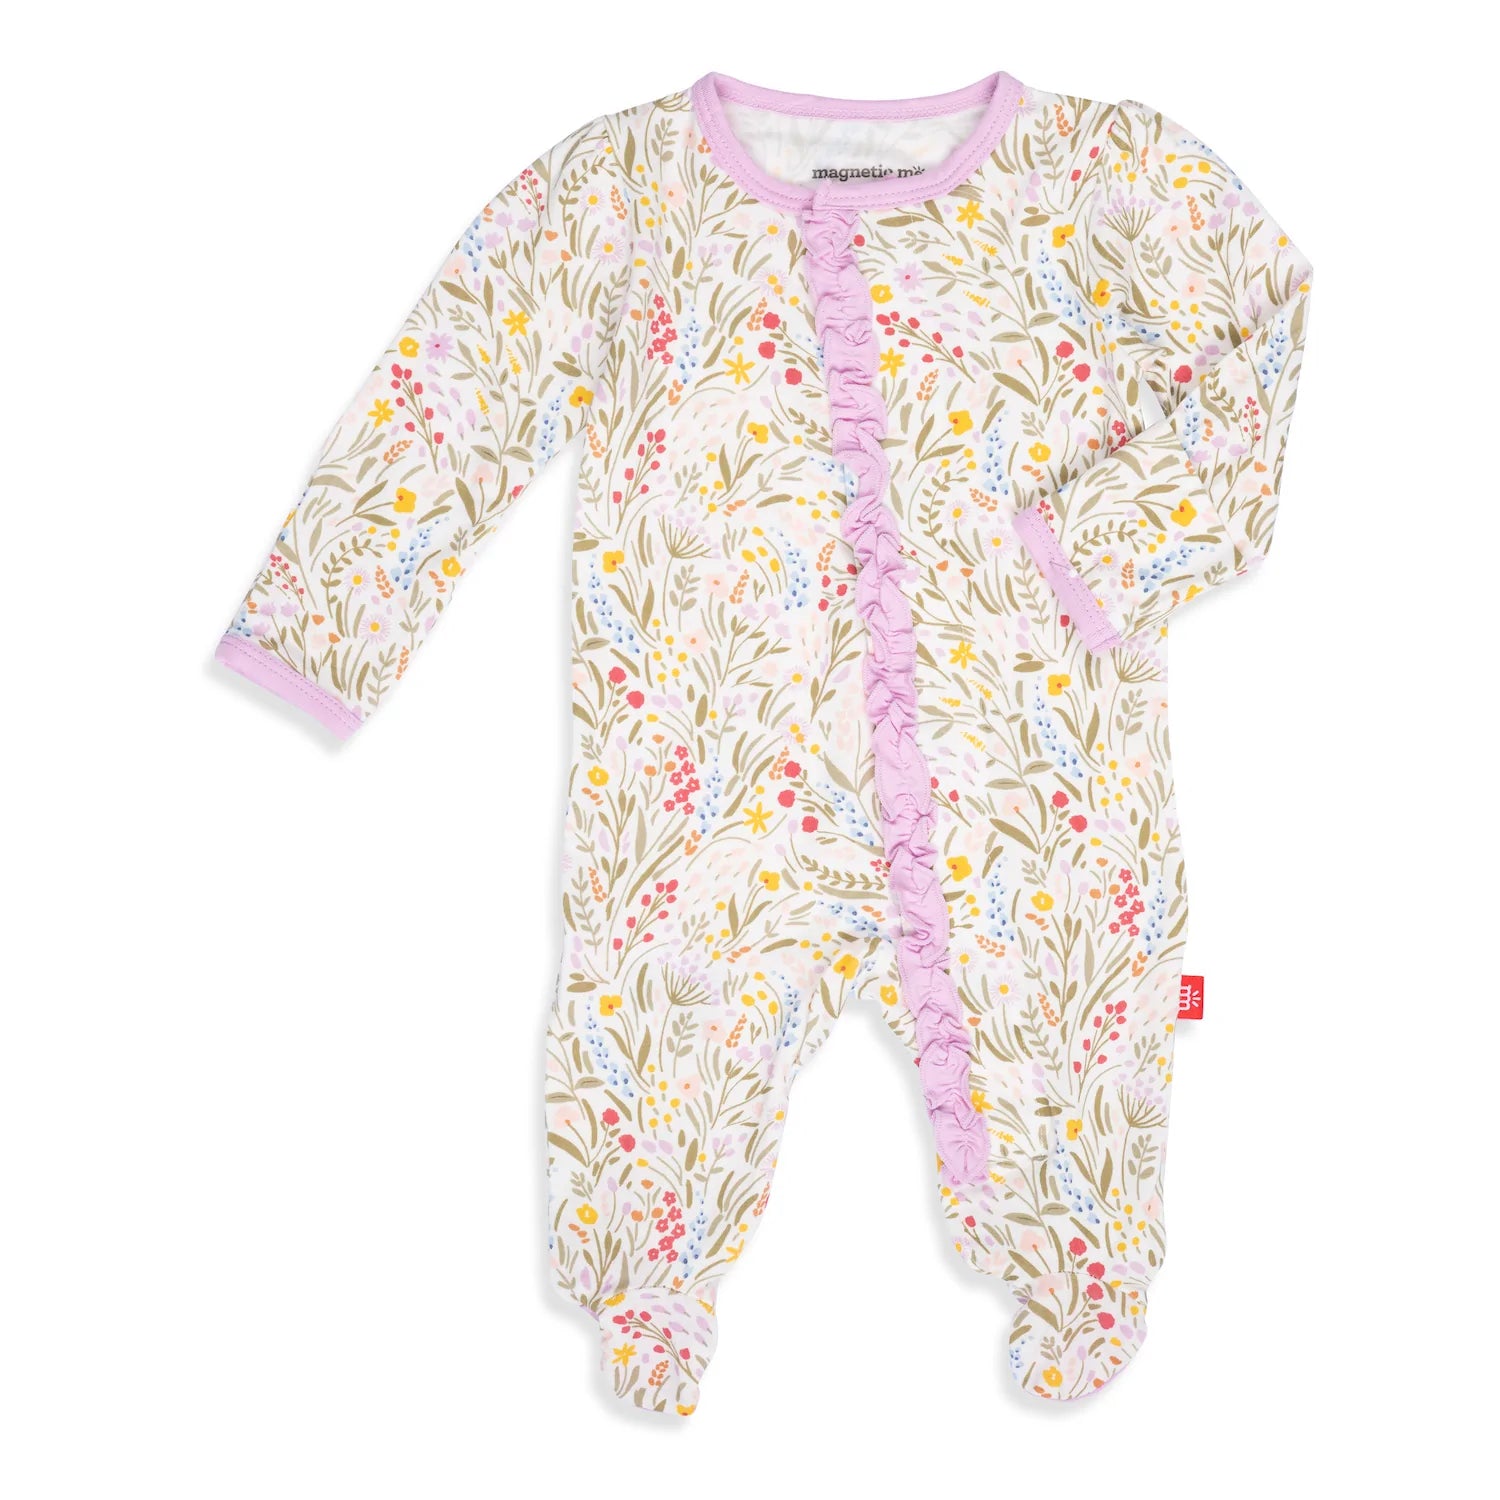 Ashleigh Modal Magnetic Ruffle Footie  - Doodlebug's Children's Boutique